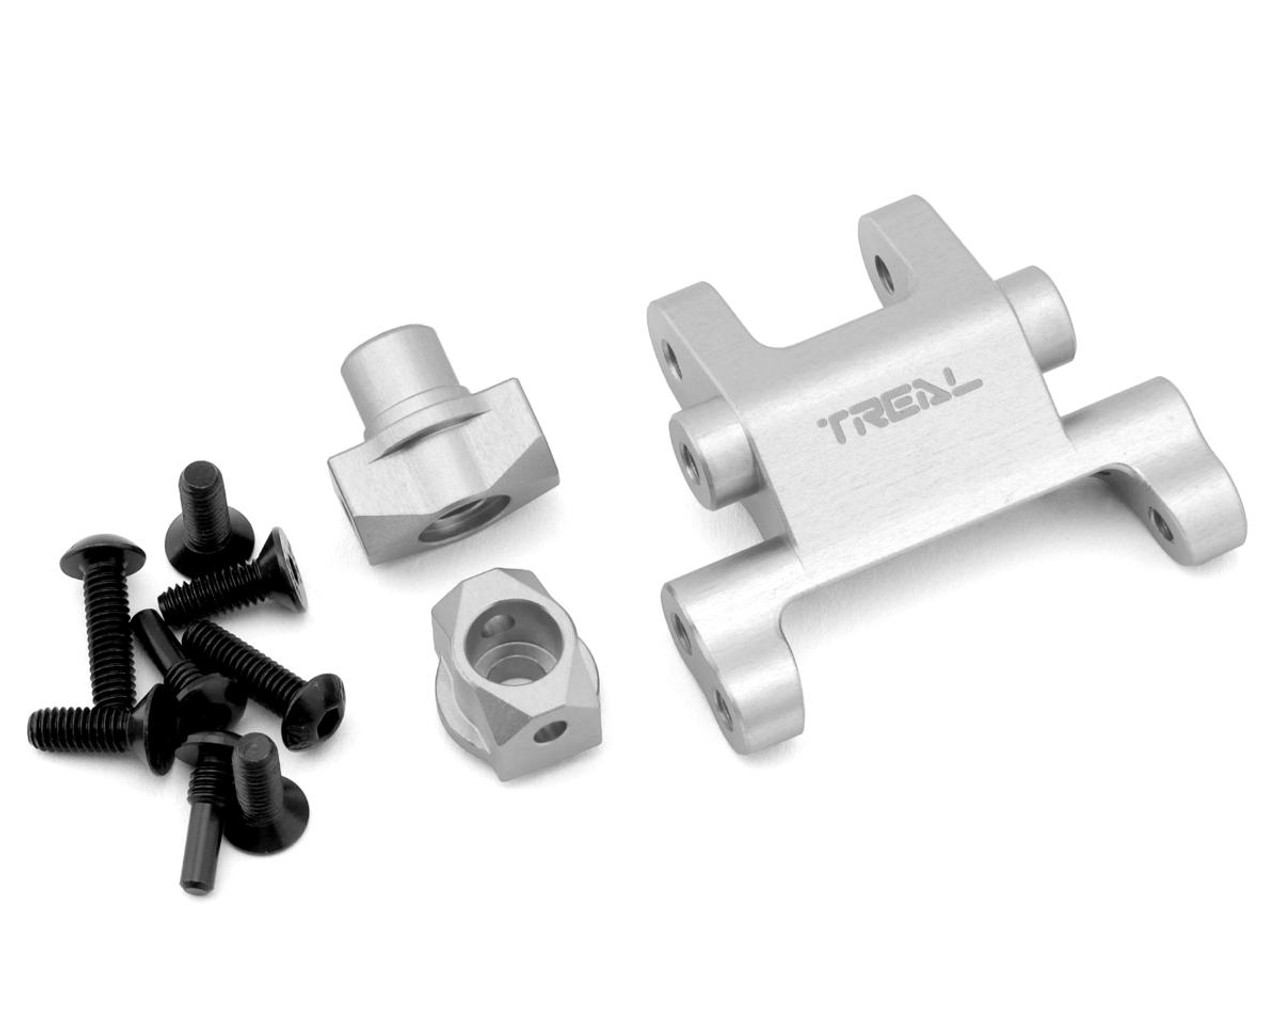 Treal Hobby Losi Promoto MX CNC Aluminum Front Suspension Mount Set (Silver)